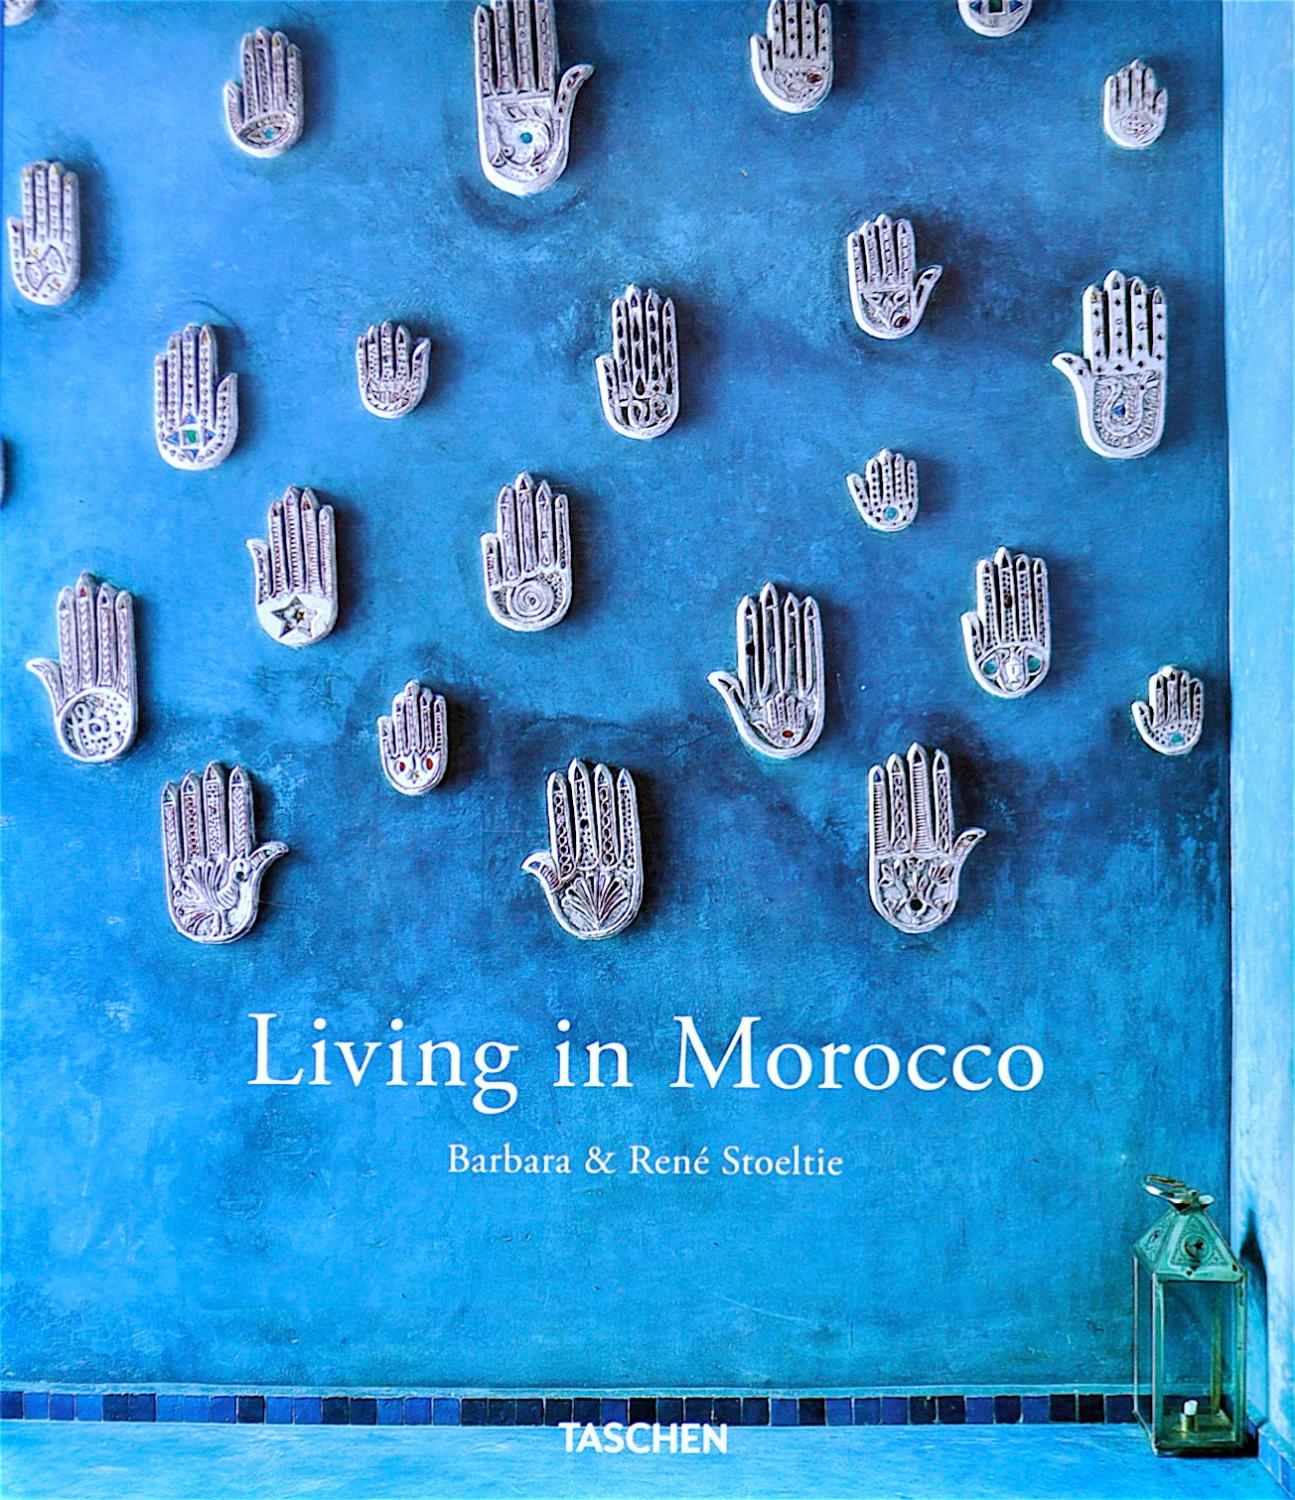 Travel Book Morocco - Art of Living - Books and Stationery